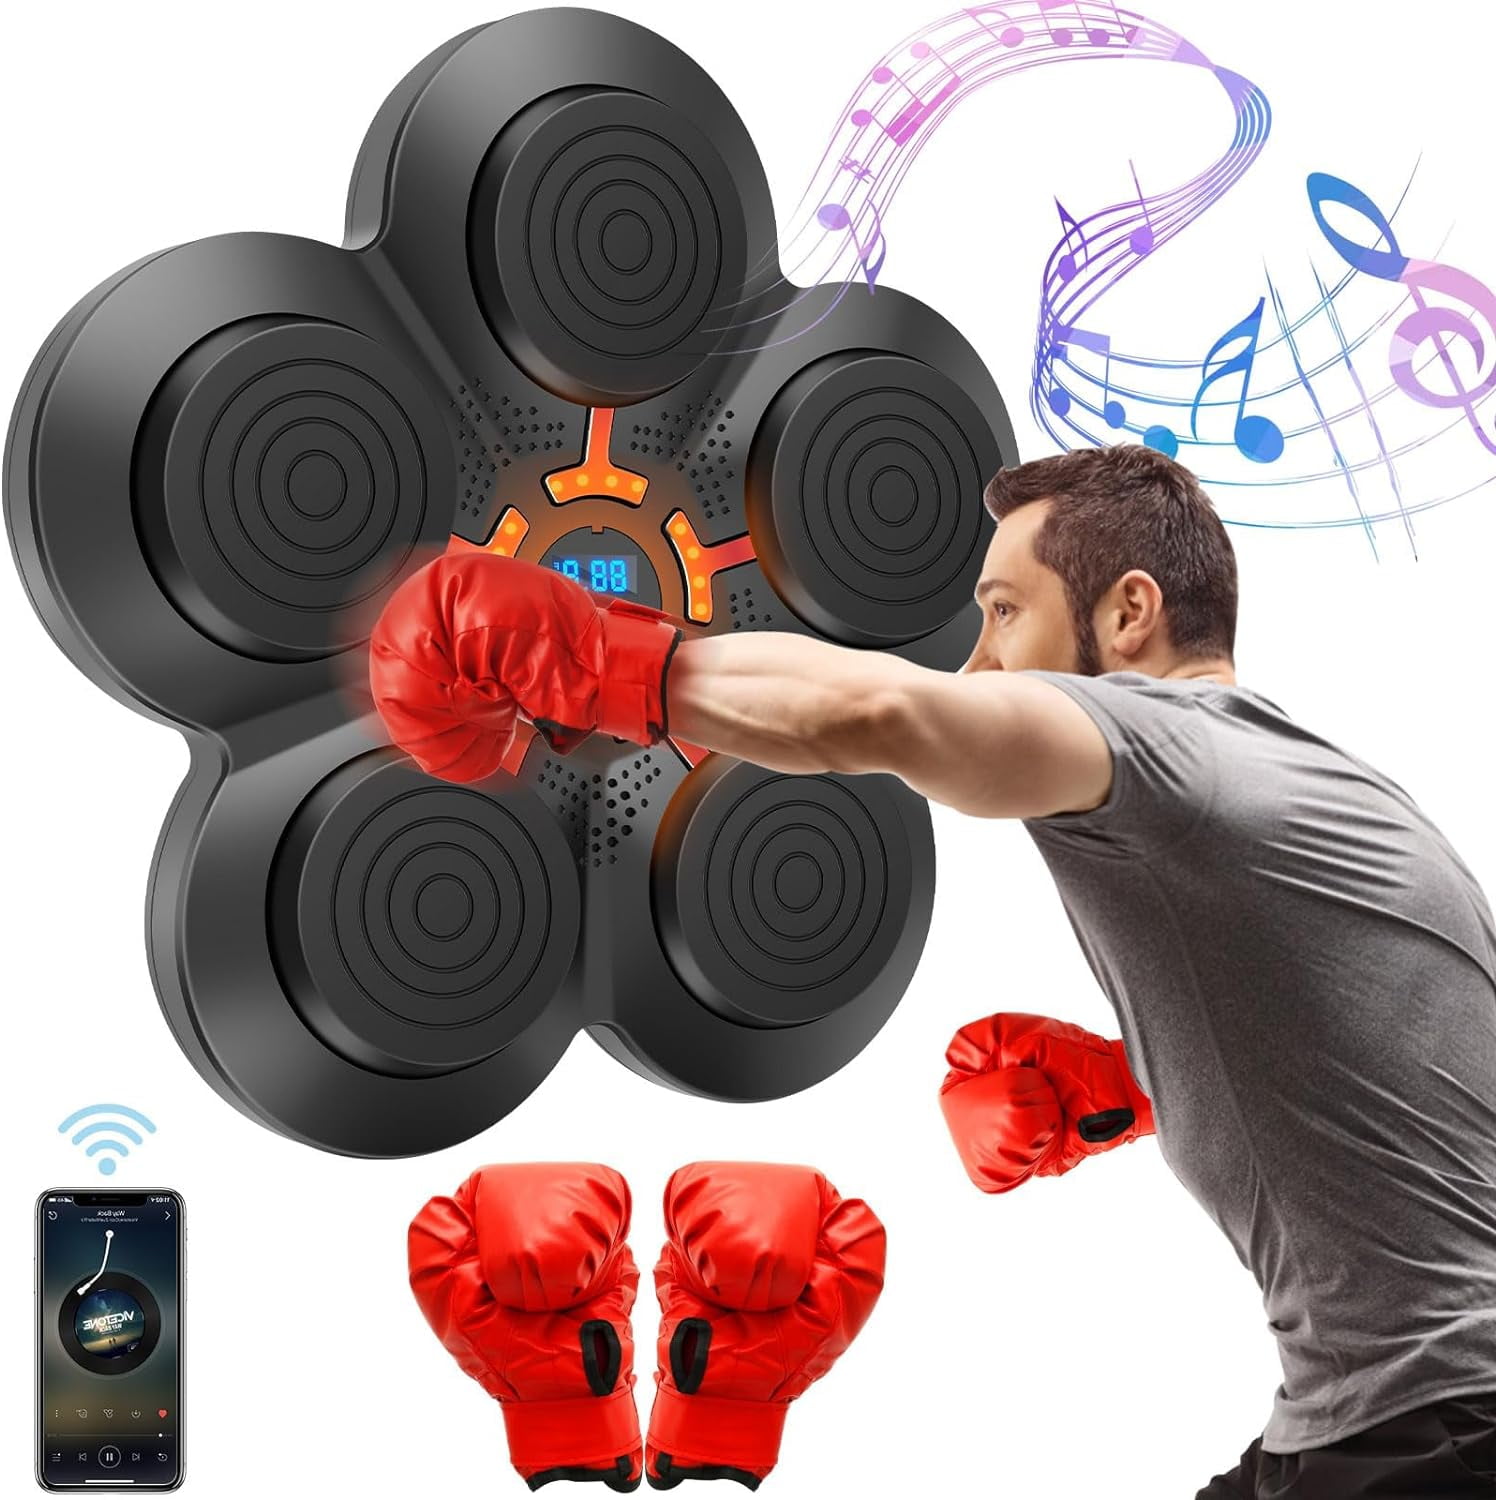  Boxing Training Machine, Smart Music Wall Mounted Punching  Sports Rechargeable LED Light, Hand/Eye/Speed Reaction for Kids/Adults/Home  Workout : Sports & Outdoors